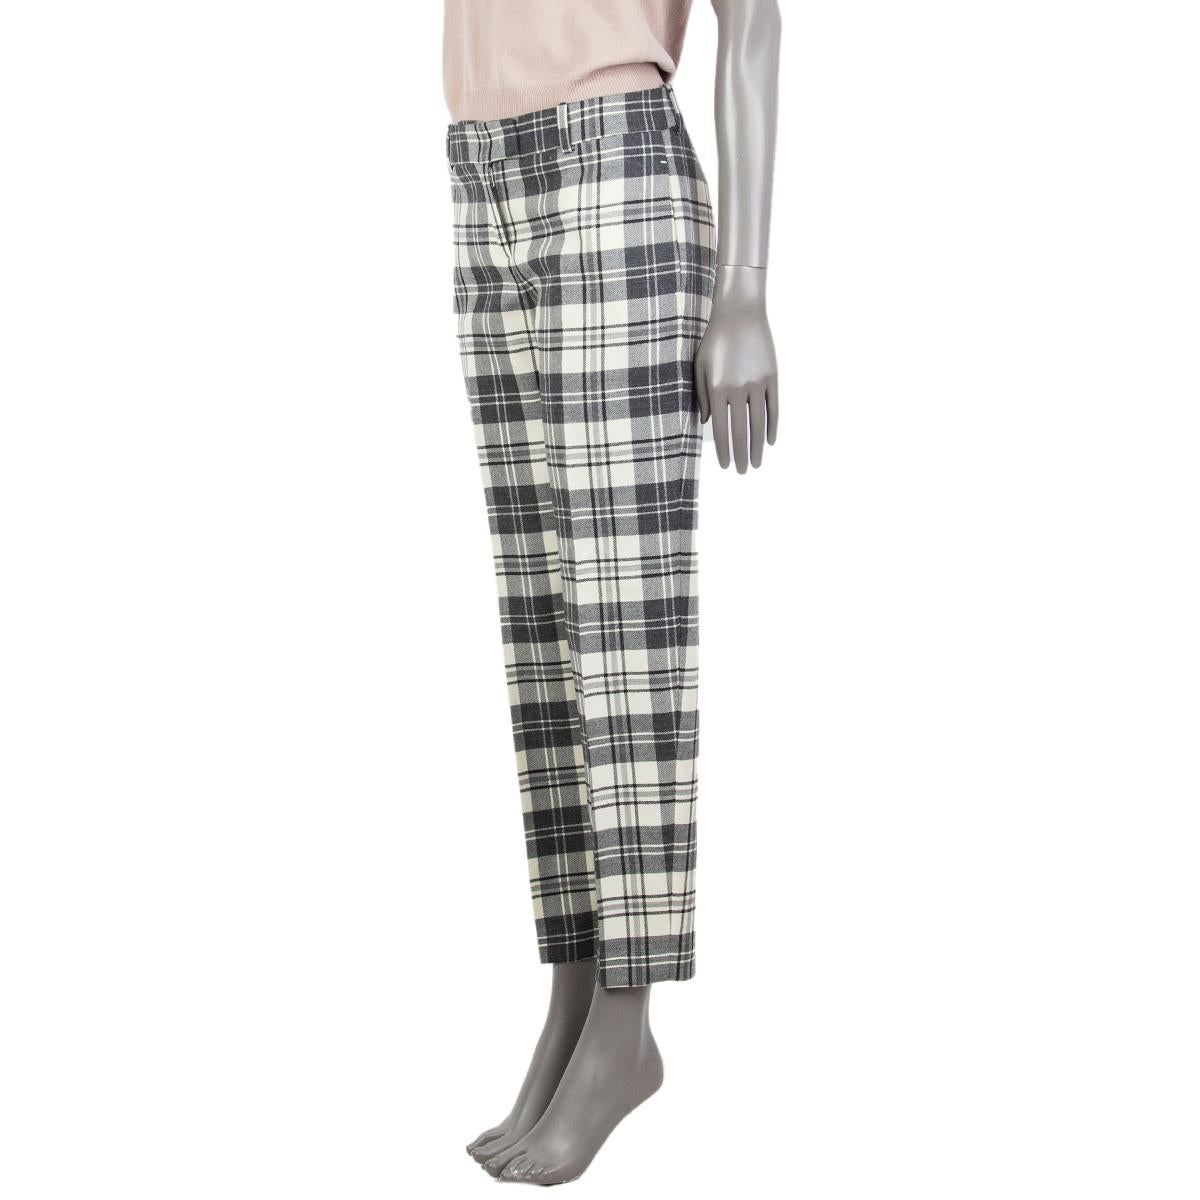 100% authentic Ermanno Scervino plaid wool pants in grey, charcoal and cream virgin wool (100%) with a mid-high waist, tapered leg, belt loops, side slit-pockets and back welt pocket. Unlined. Closes with a zipper, button, hook and bar in the front.